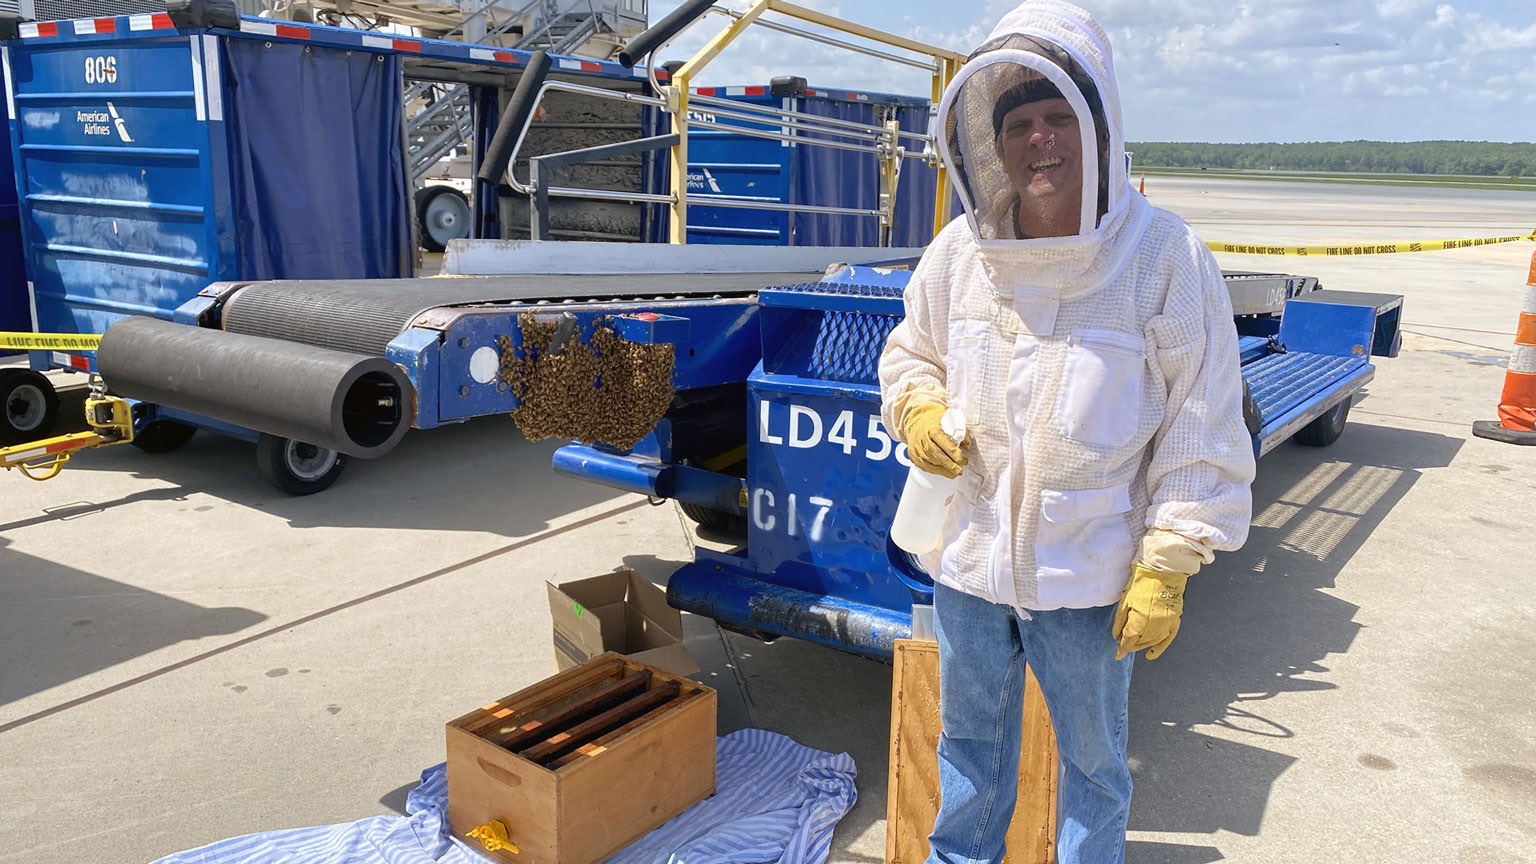 Tom Kwak helps move bees at RDU